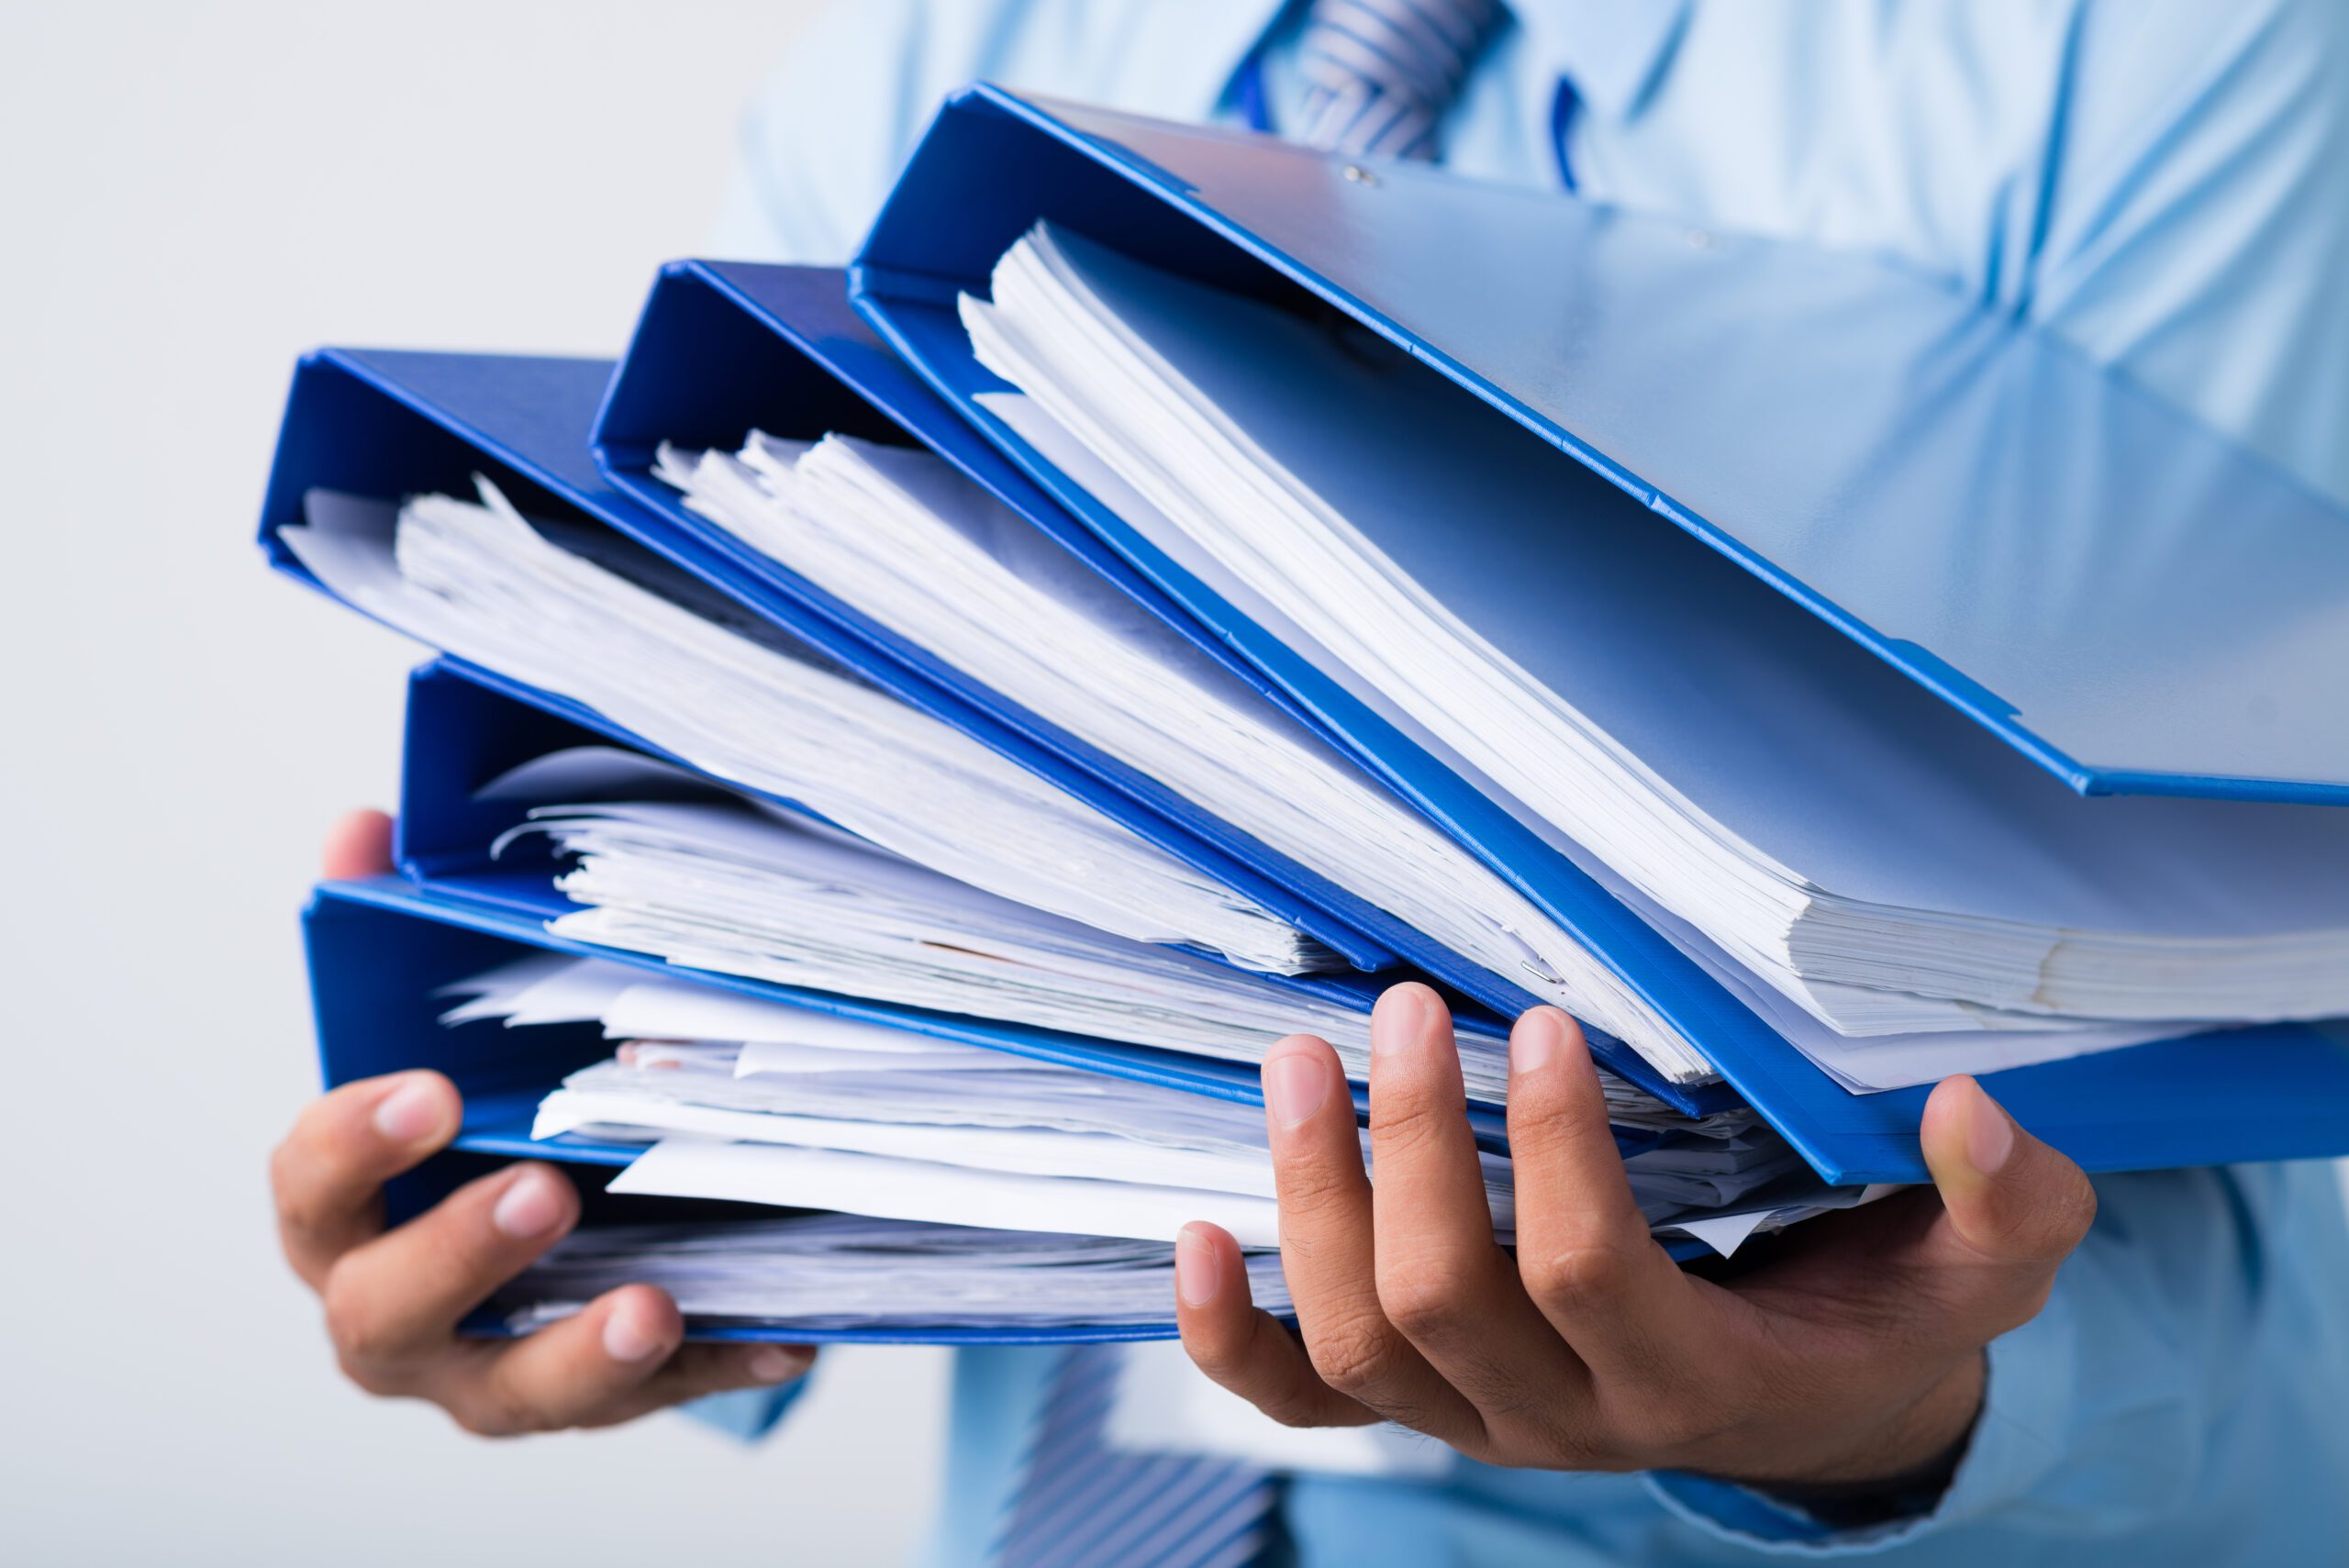 Close-up of human hands holding a stack of folders with business documents on the foreground